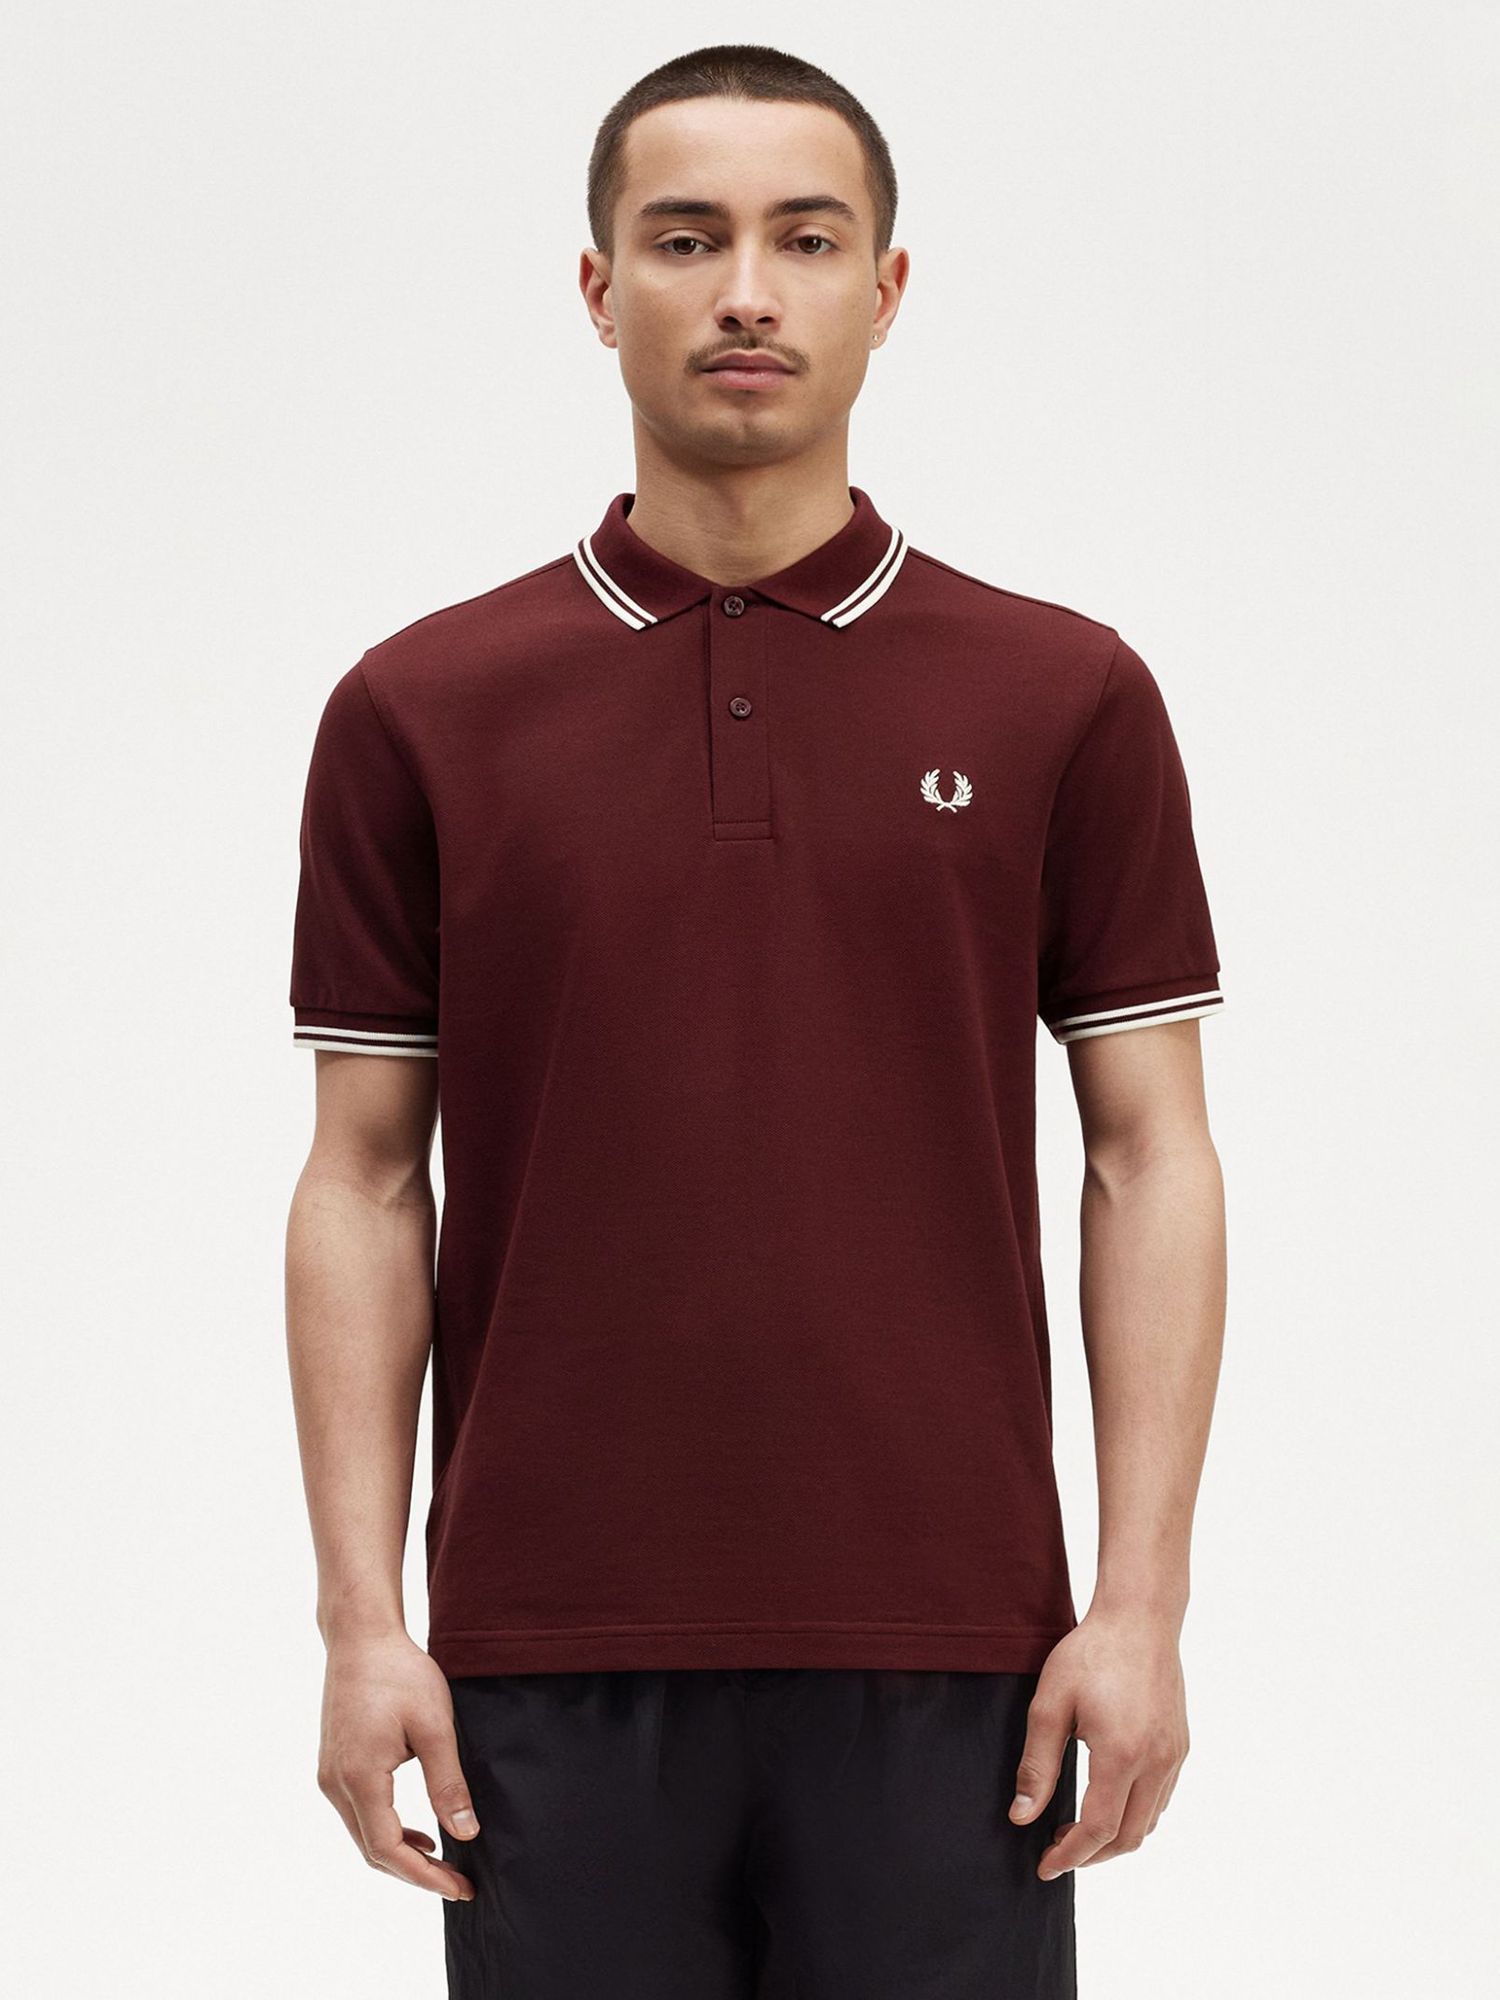 Fred Perry Twin Tipped Regular Fit Polo Shirt, Red at John Lewis & Partners